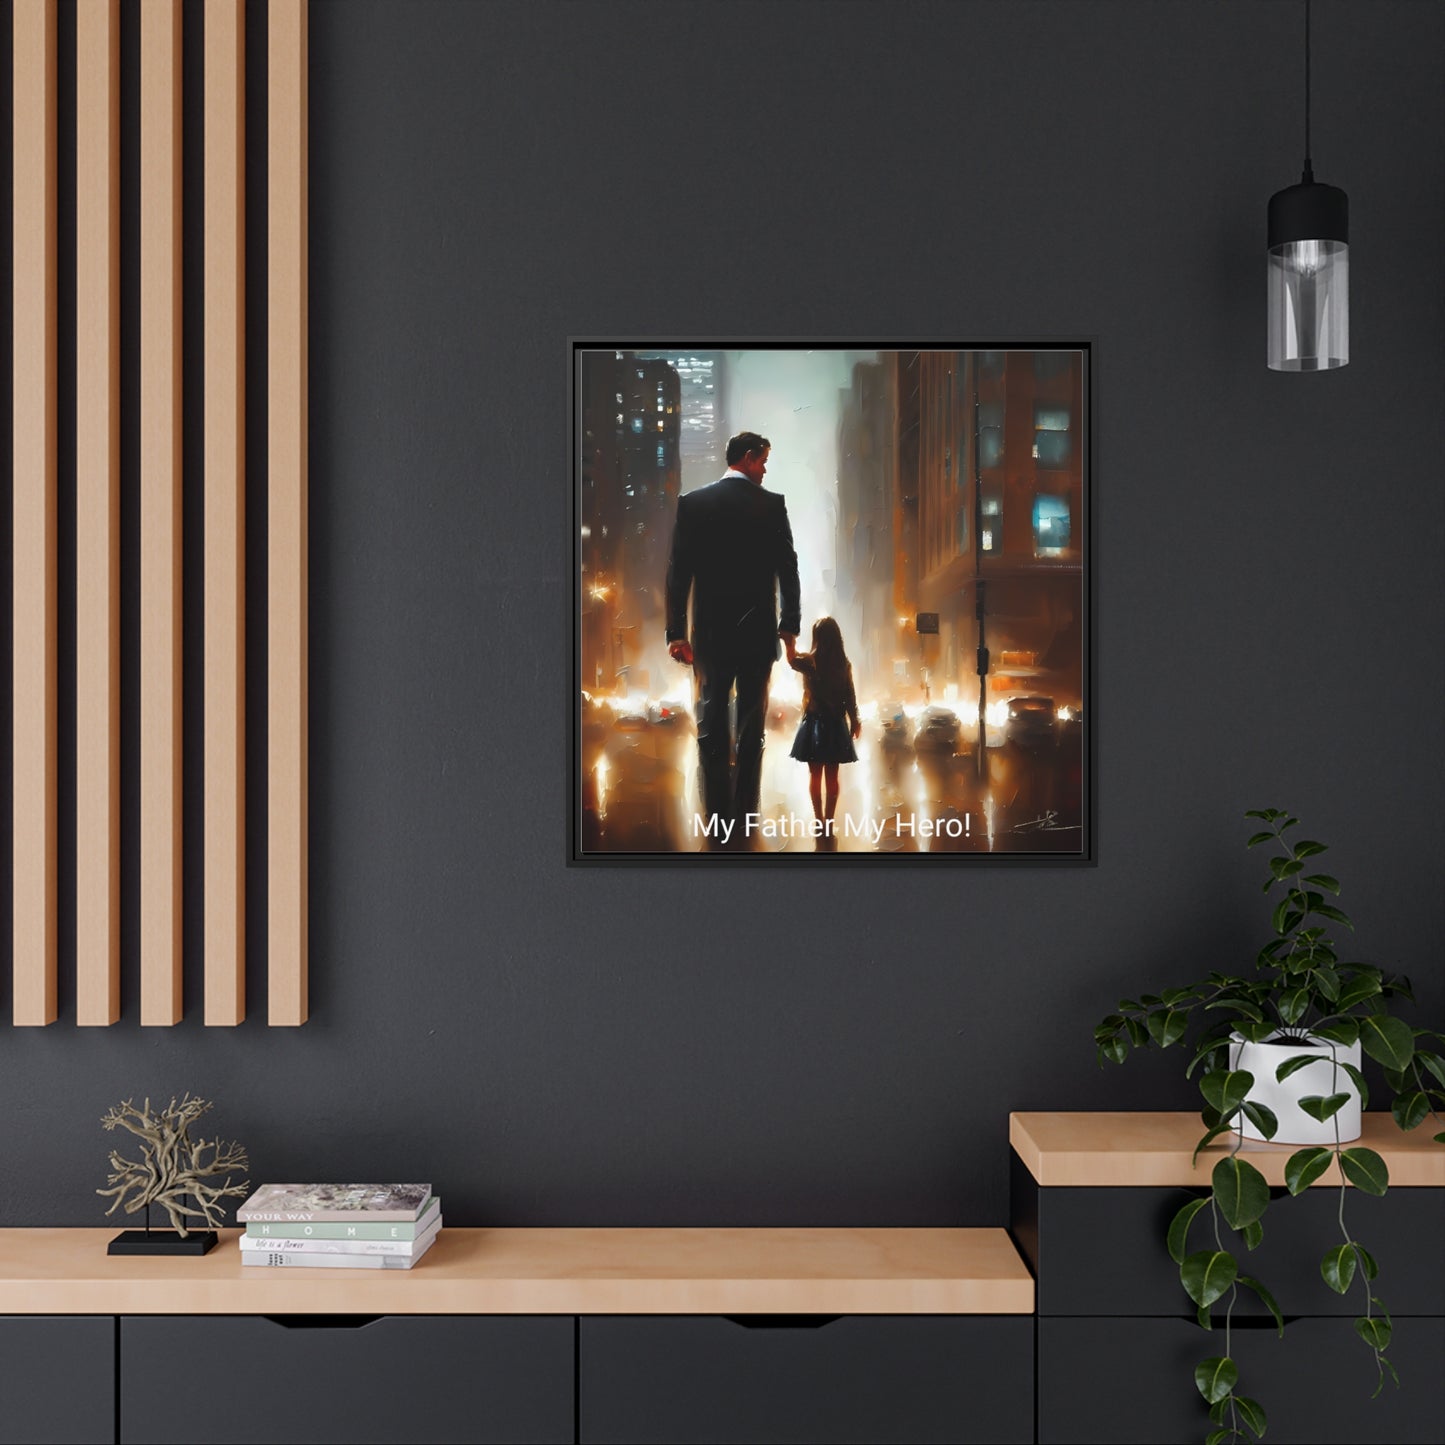 Awesome Matte Wall Art Canvas Decor Black Frame - My Father My Hero! Fathers Day Gift Item